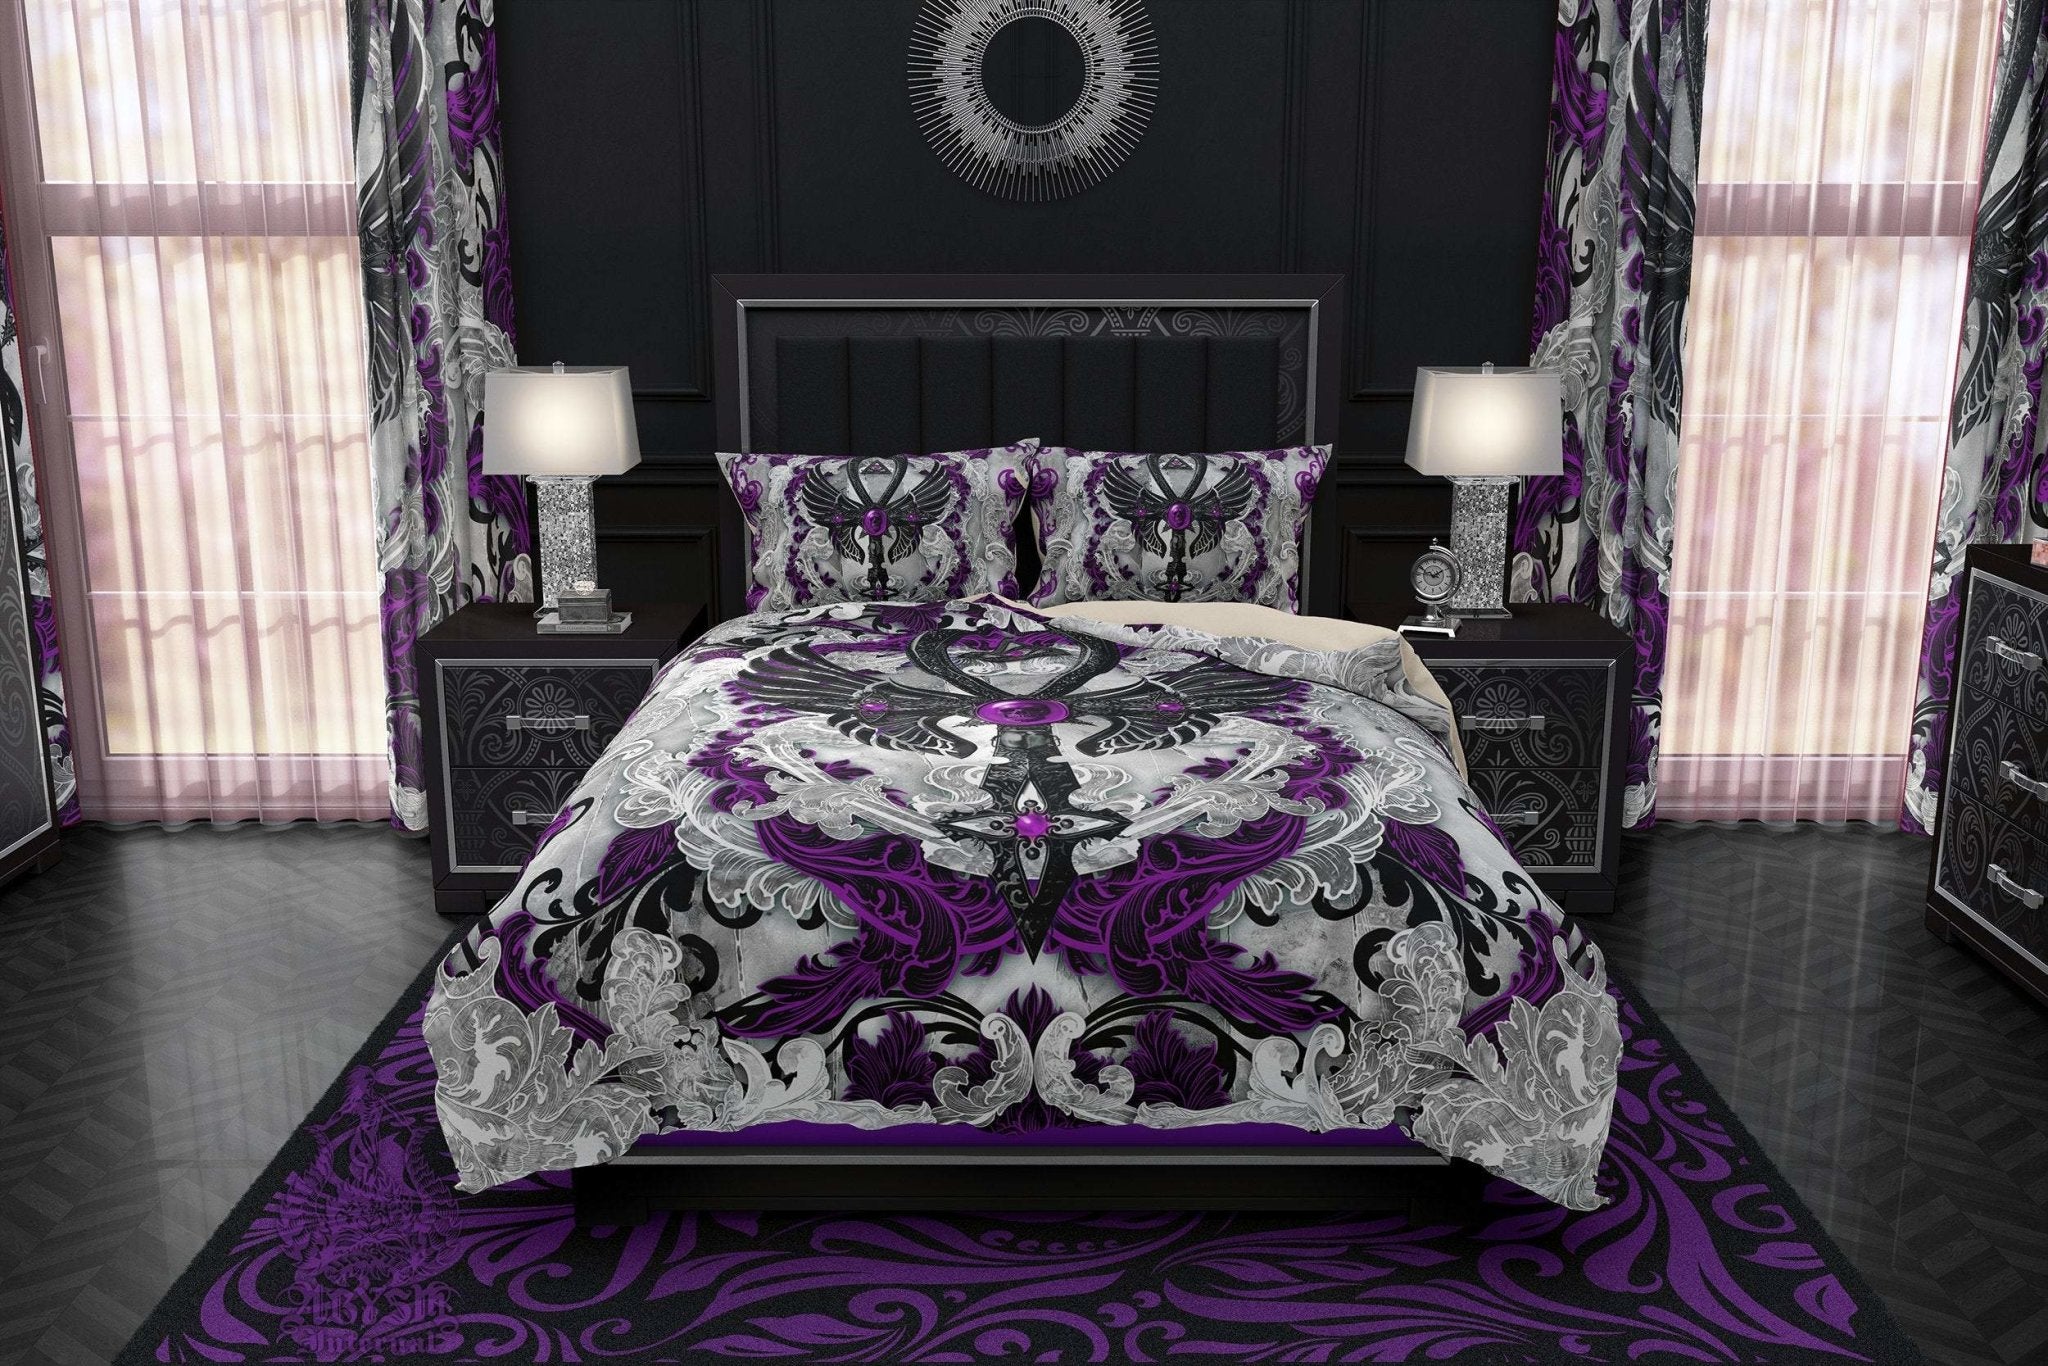 Pastel Goth Bedding Set, Comforter and Duvet, Ankh Cross, Gothic Bed Cover and Bedroom Decor, King, Queen and Twin Size - White Purple - Abysm Internal